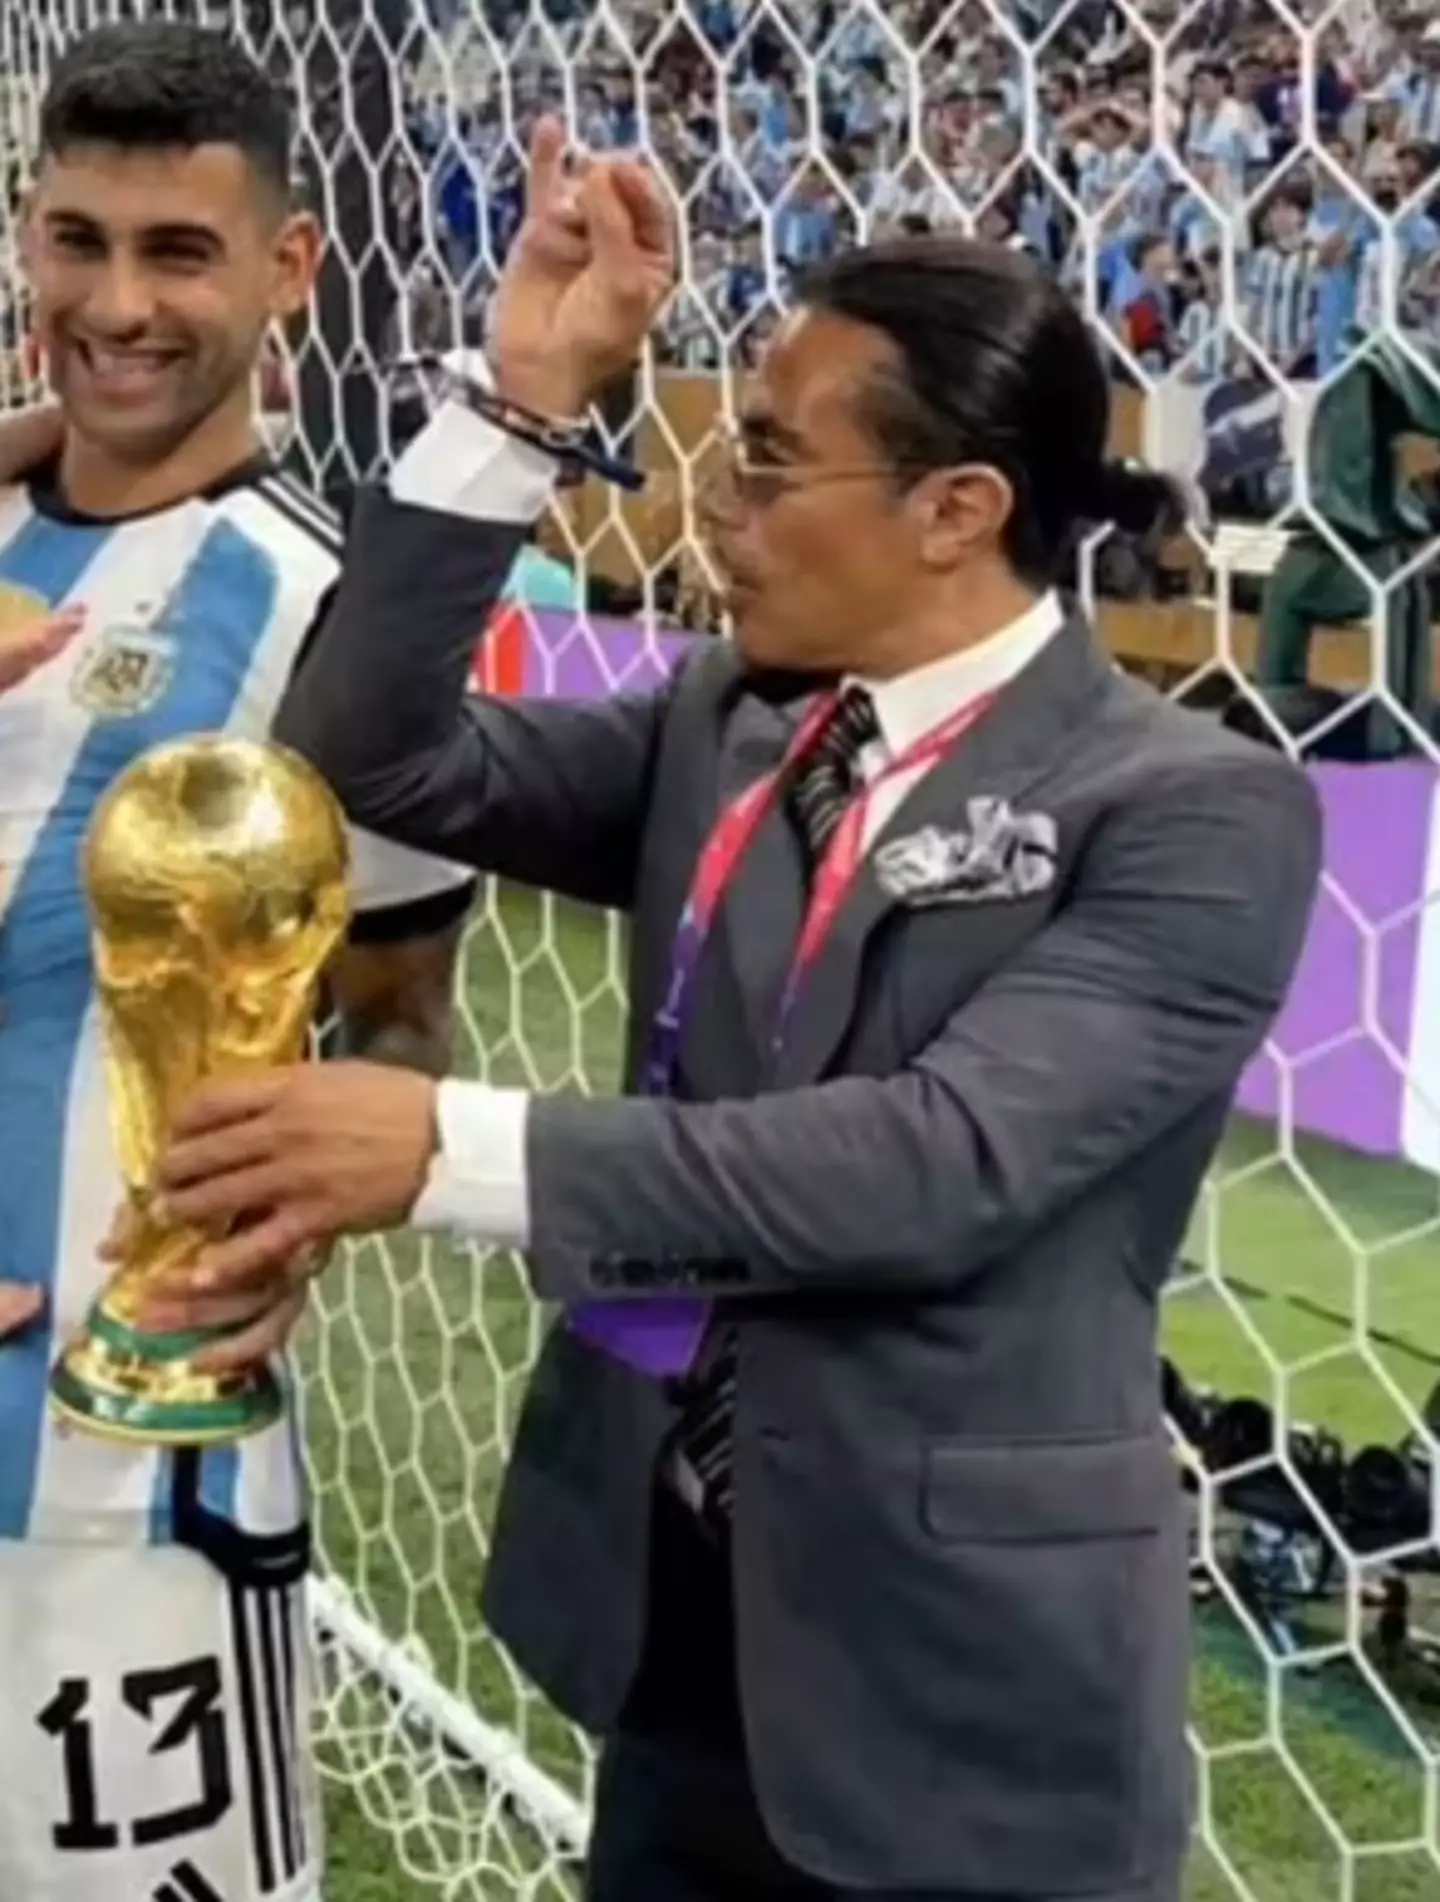 Salt Bae broke FIFA rules when he handled the World Cup trophy and posed for pictures with it.